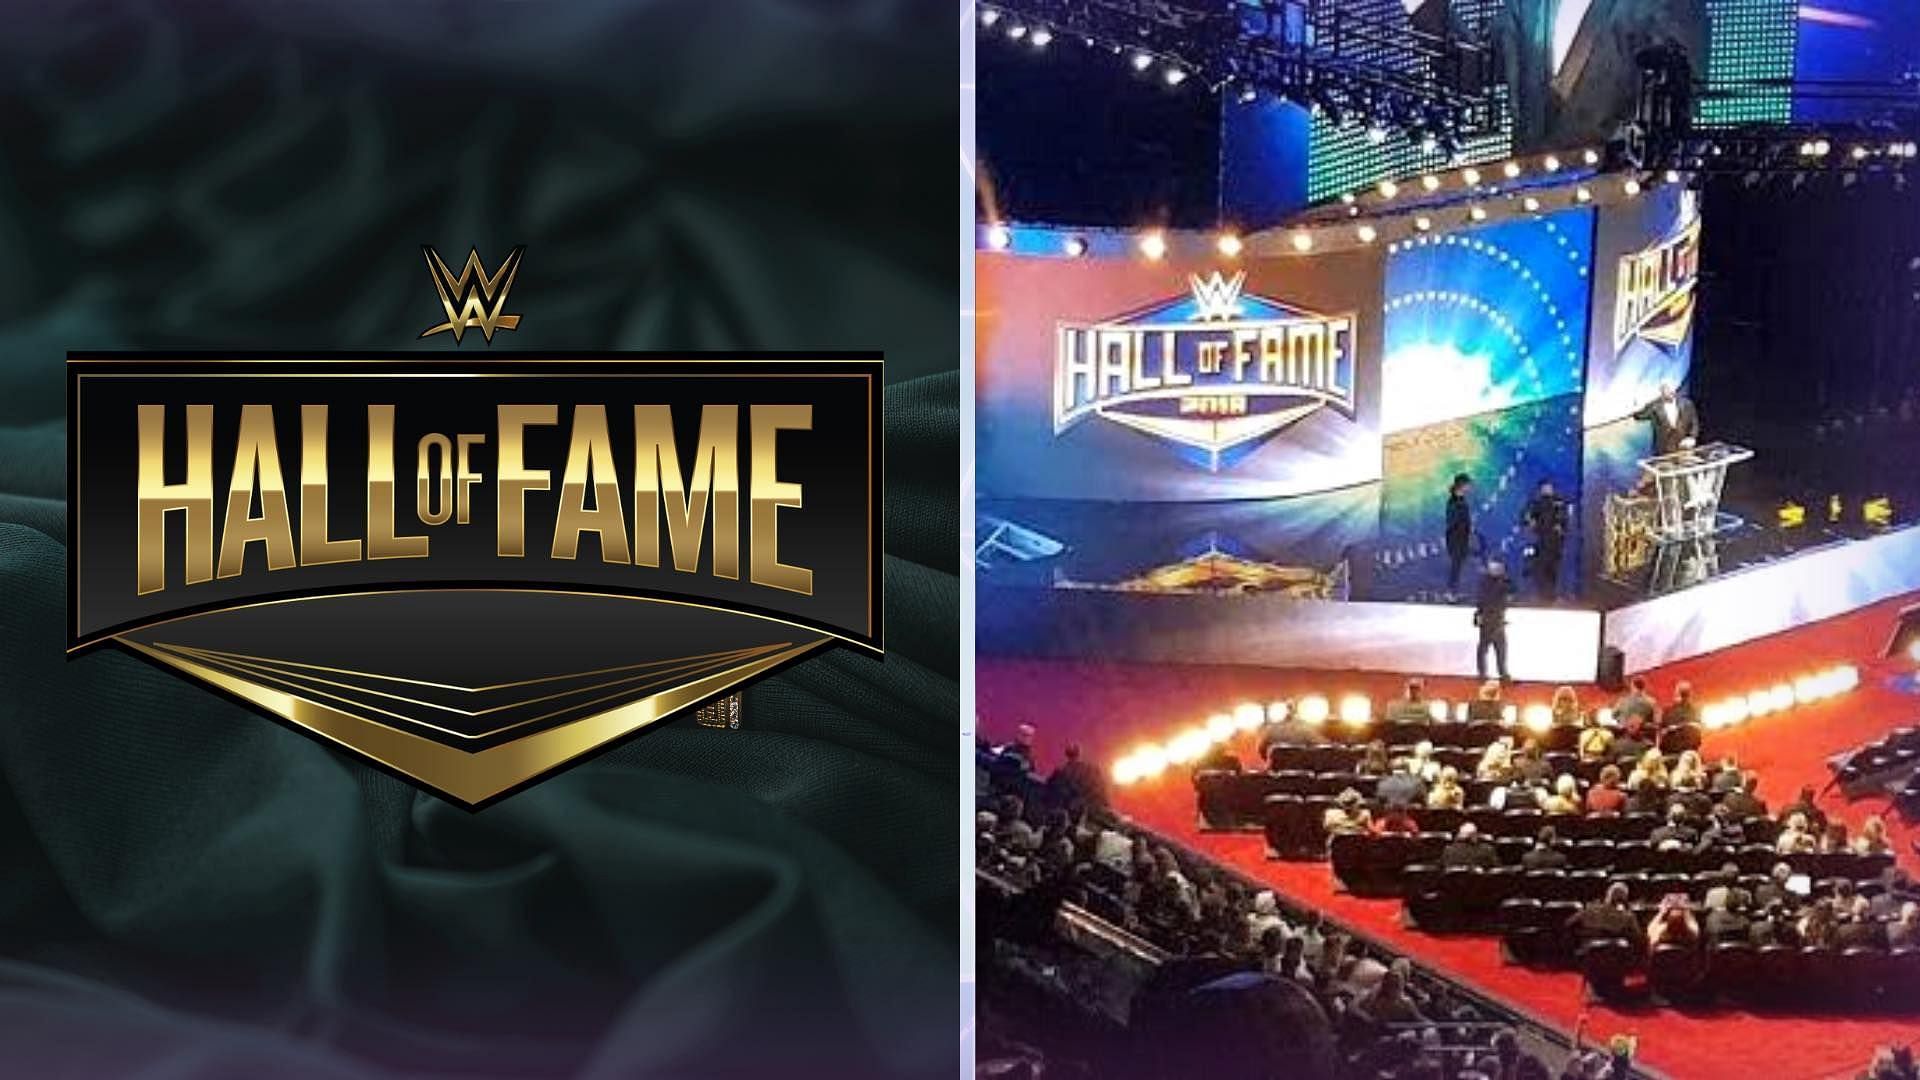 WWE Hall of Fame is an annual event which takes place every year on the eve of Wrestlemania